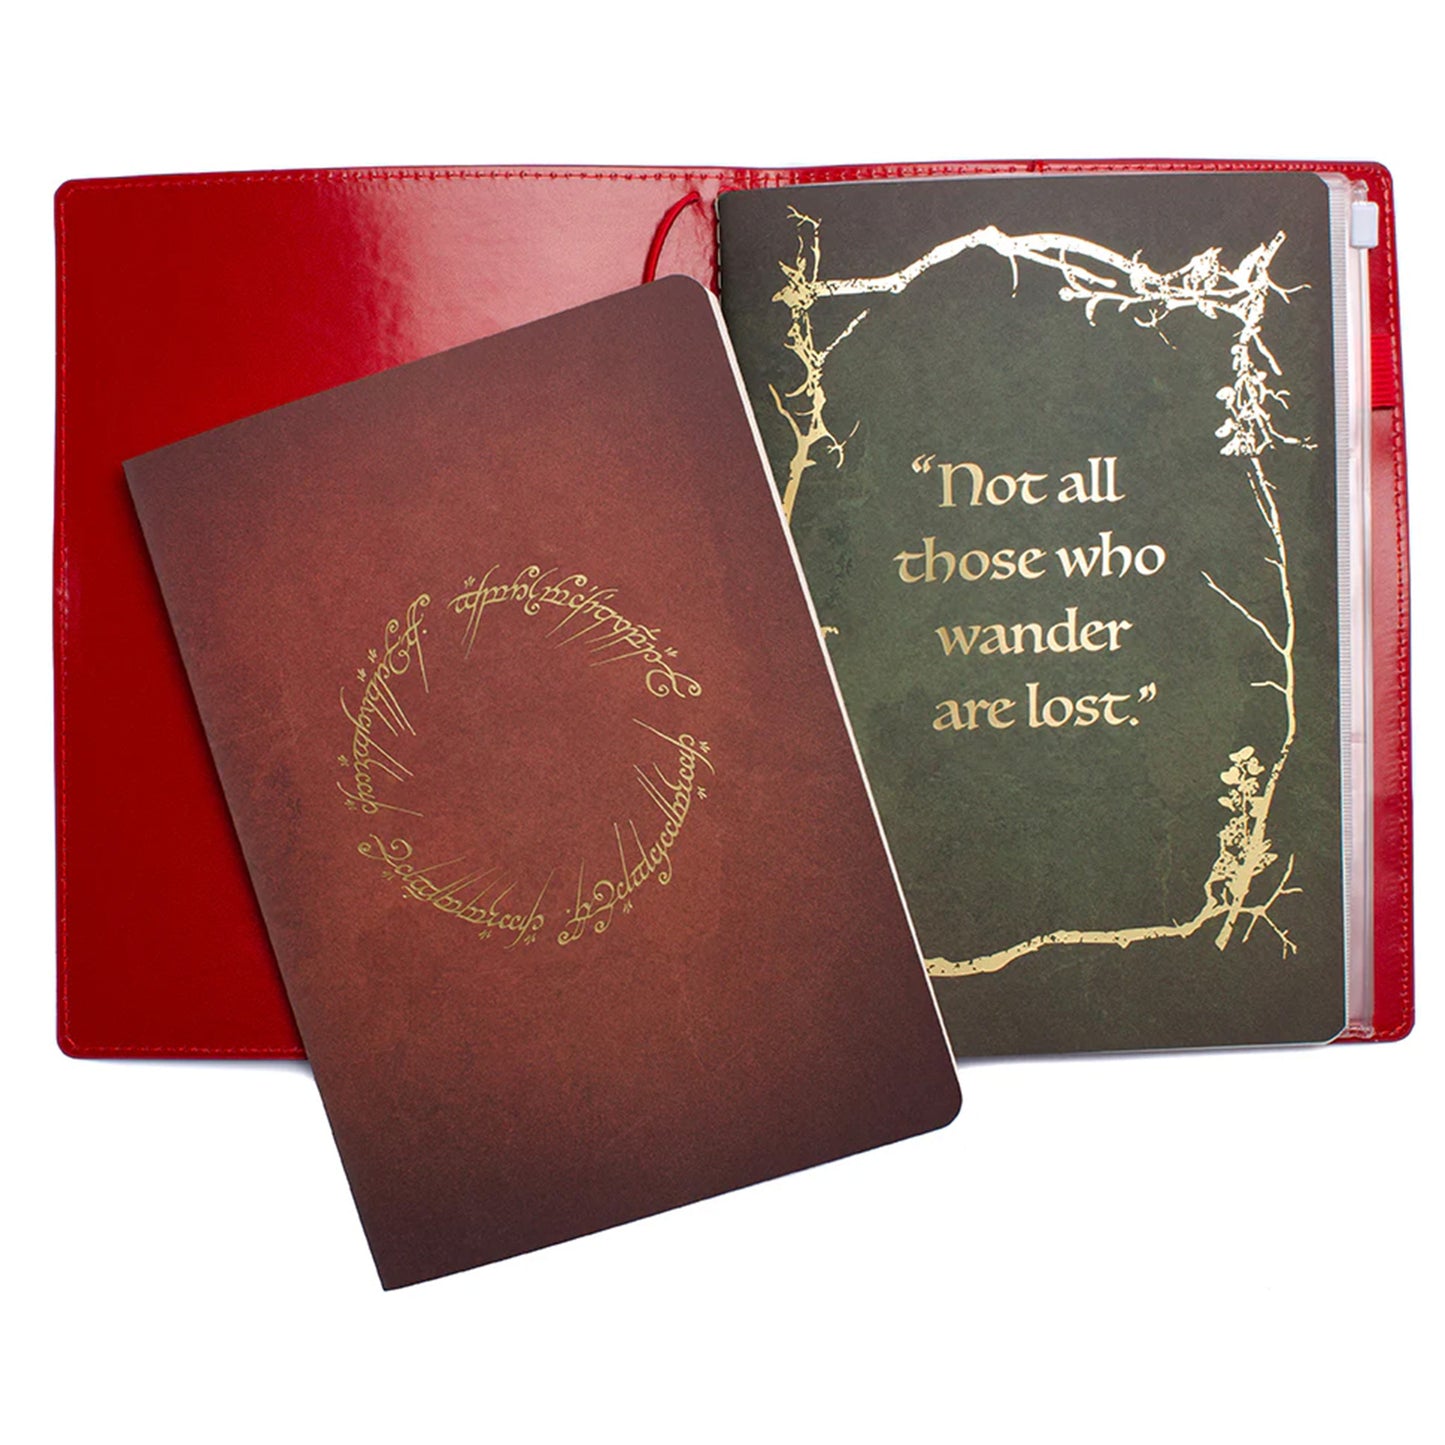 Lord of the Rings Soft Cover Travelers Journal